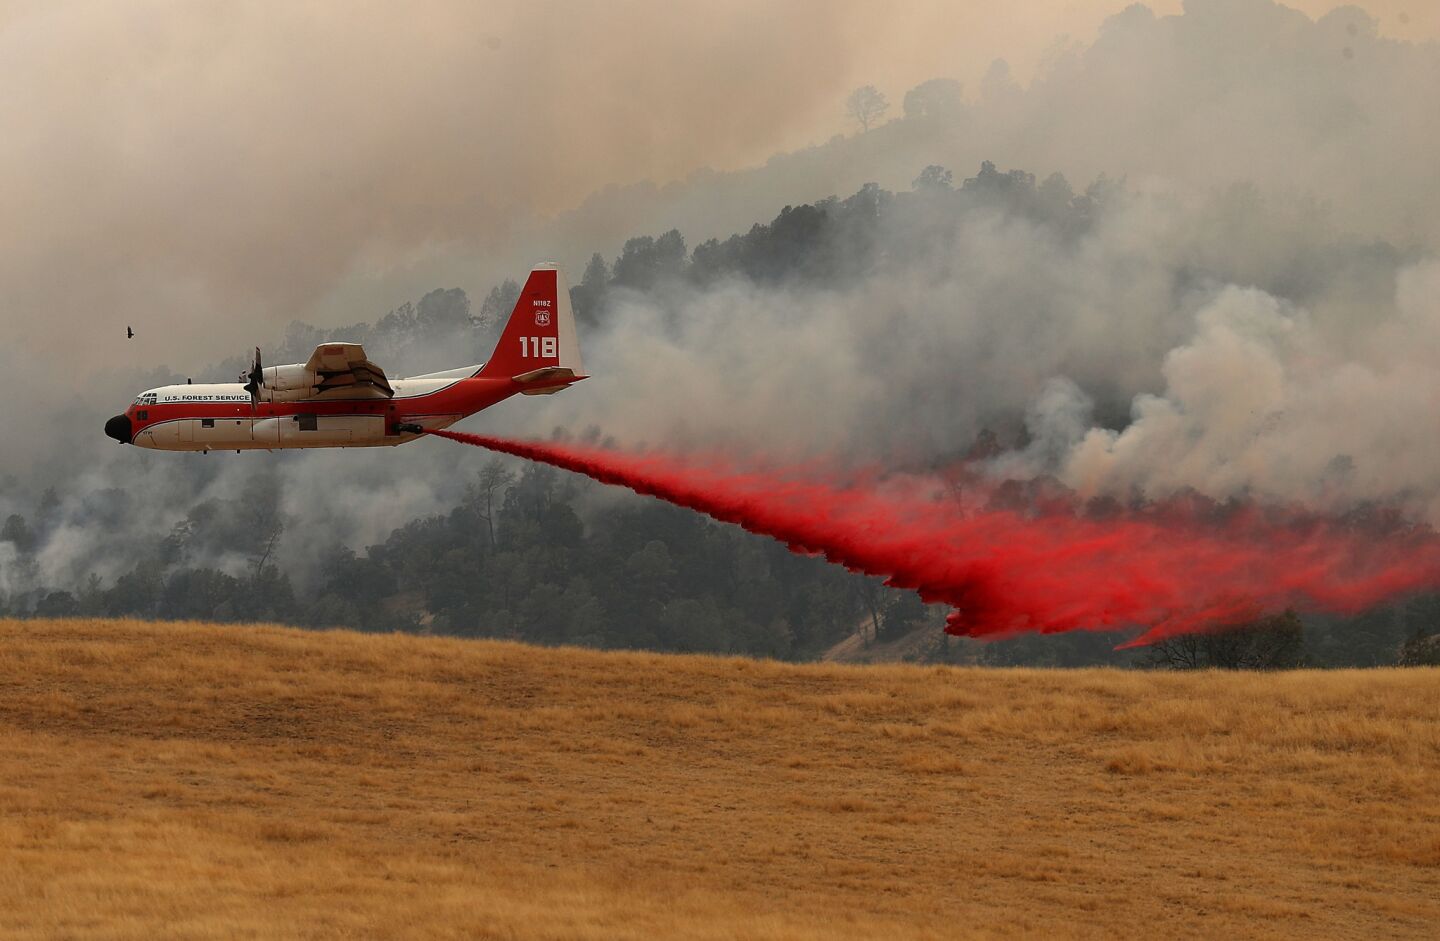 A firefighting air tanker drops fire retardant on a hillside ahead of the County Fire Monday in Esparto, California.